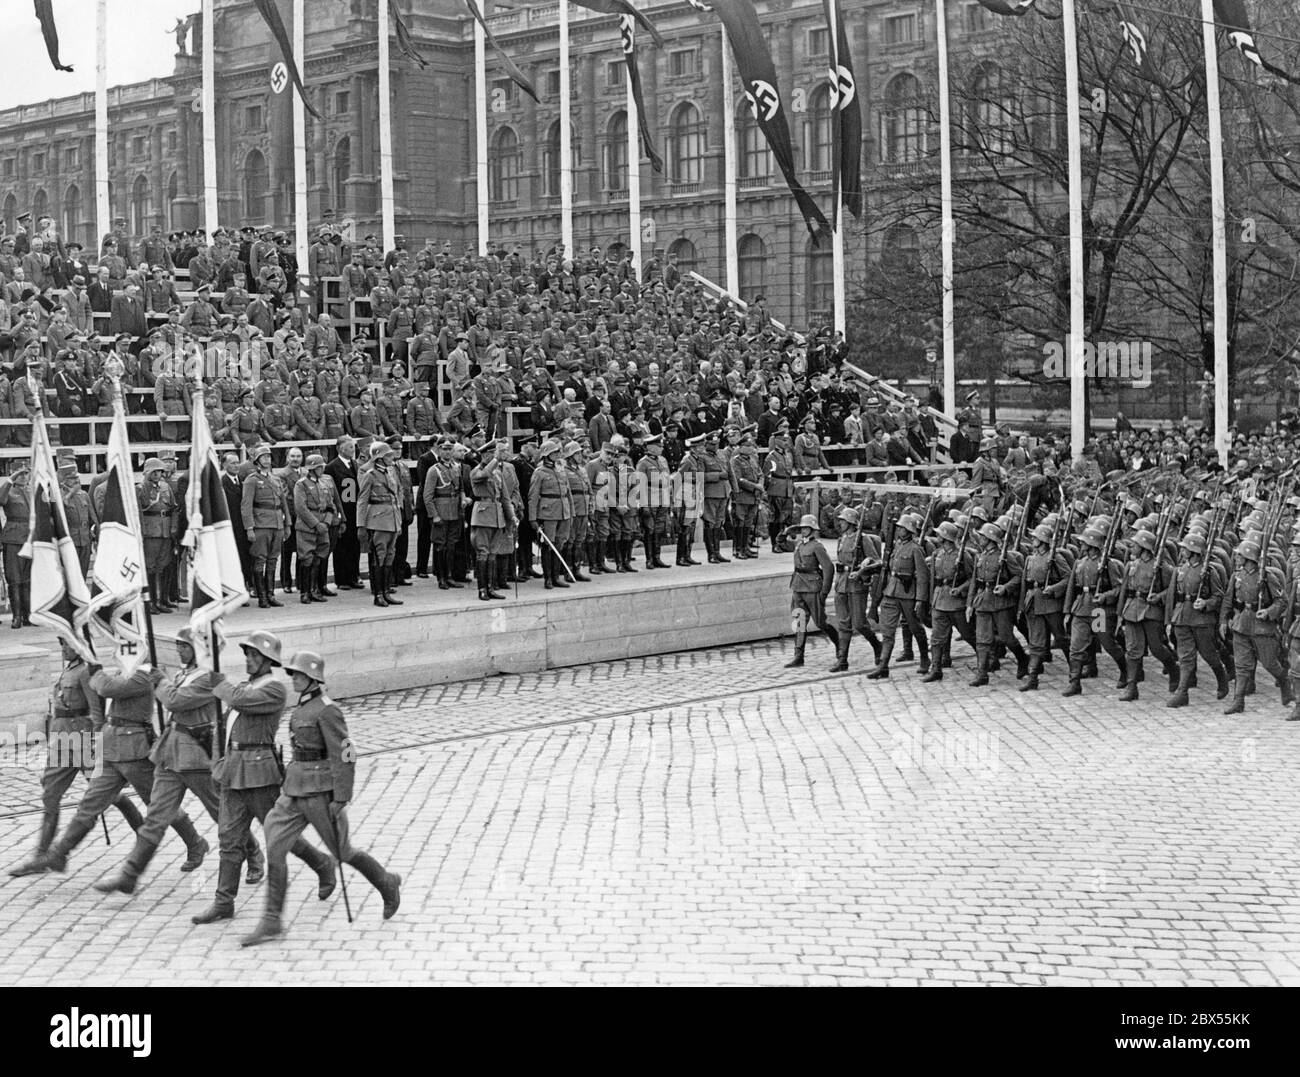 The 10th Division of the 8th Army of the Wehrmacht marches on the Heldenplatz in front of the VIP tribune. The parade takes place in the course of the rally for the annexation of Austria to the German Reich. Besides Adolf Hitler, the Reich Governor Arthur Seyss-Inquart and Generals Alfred Krauss and Fedor von Bock also attended the festivities. Stock Photo